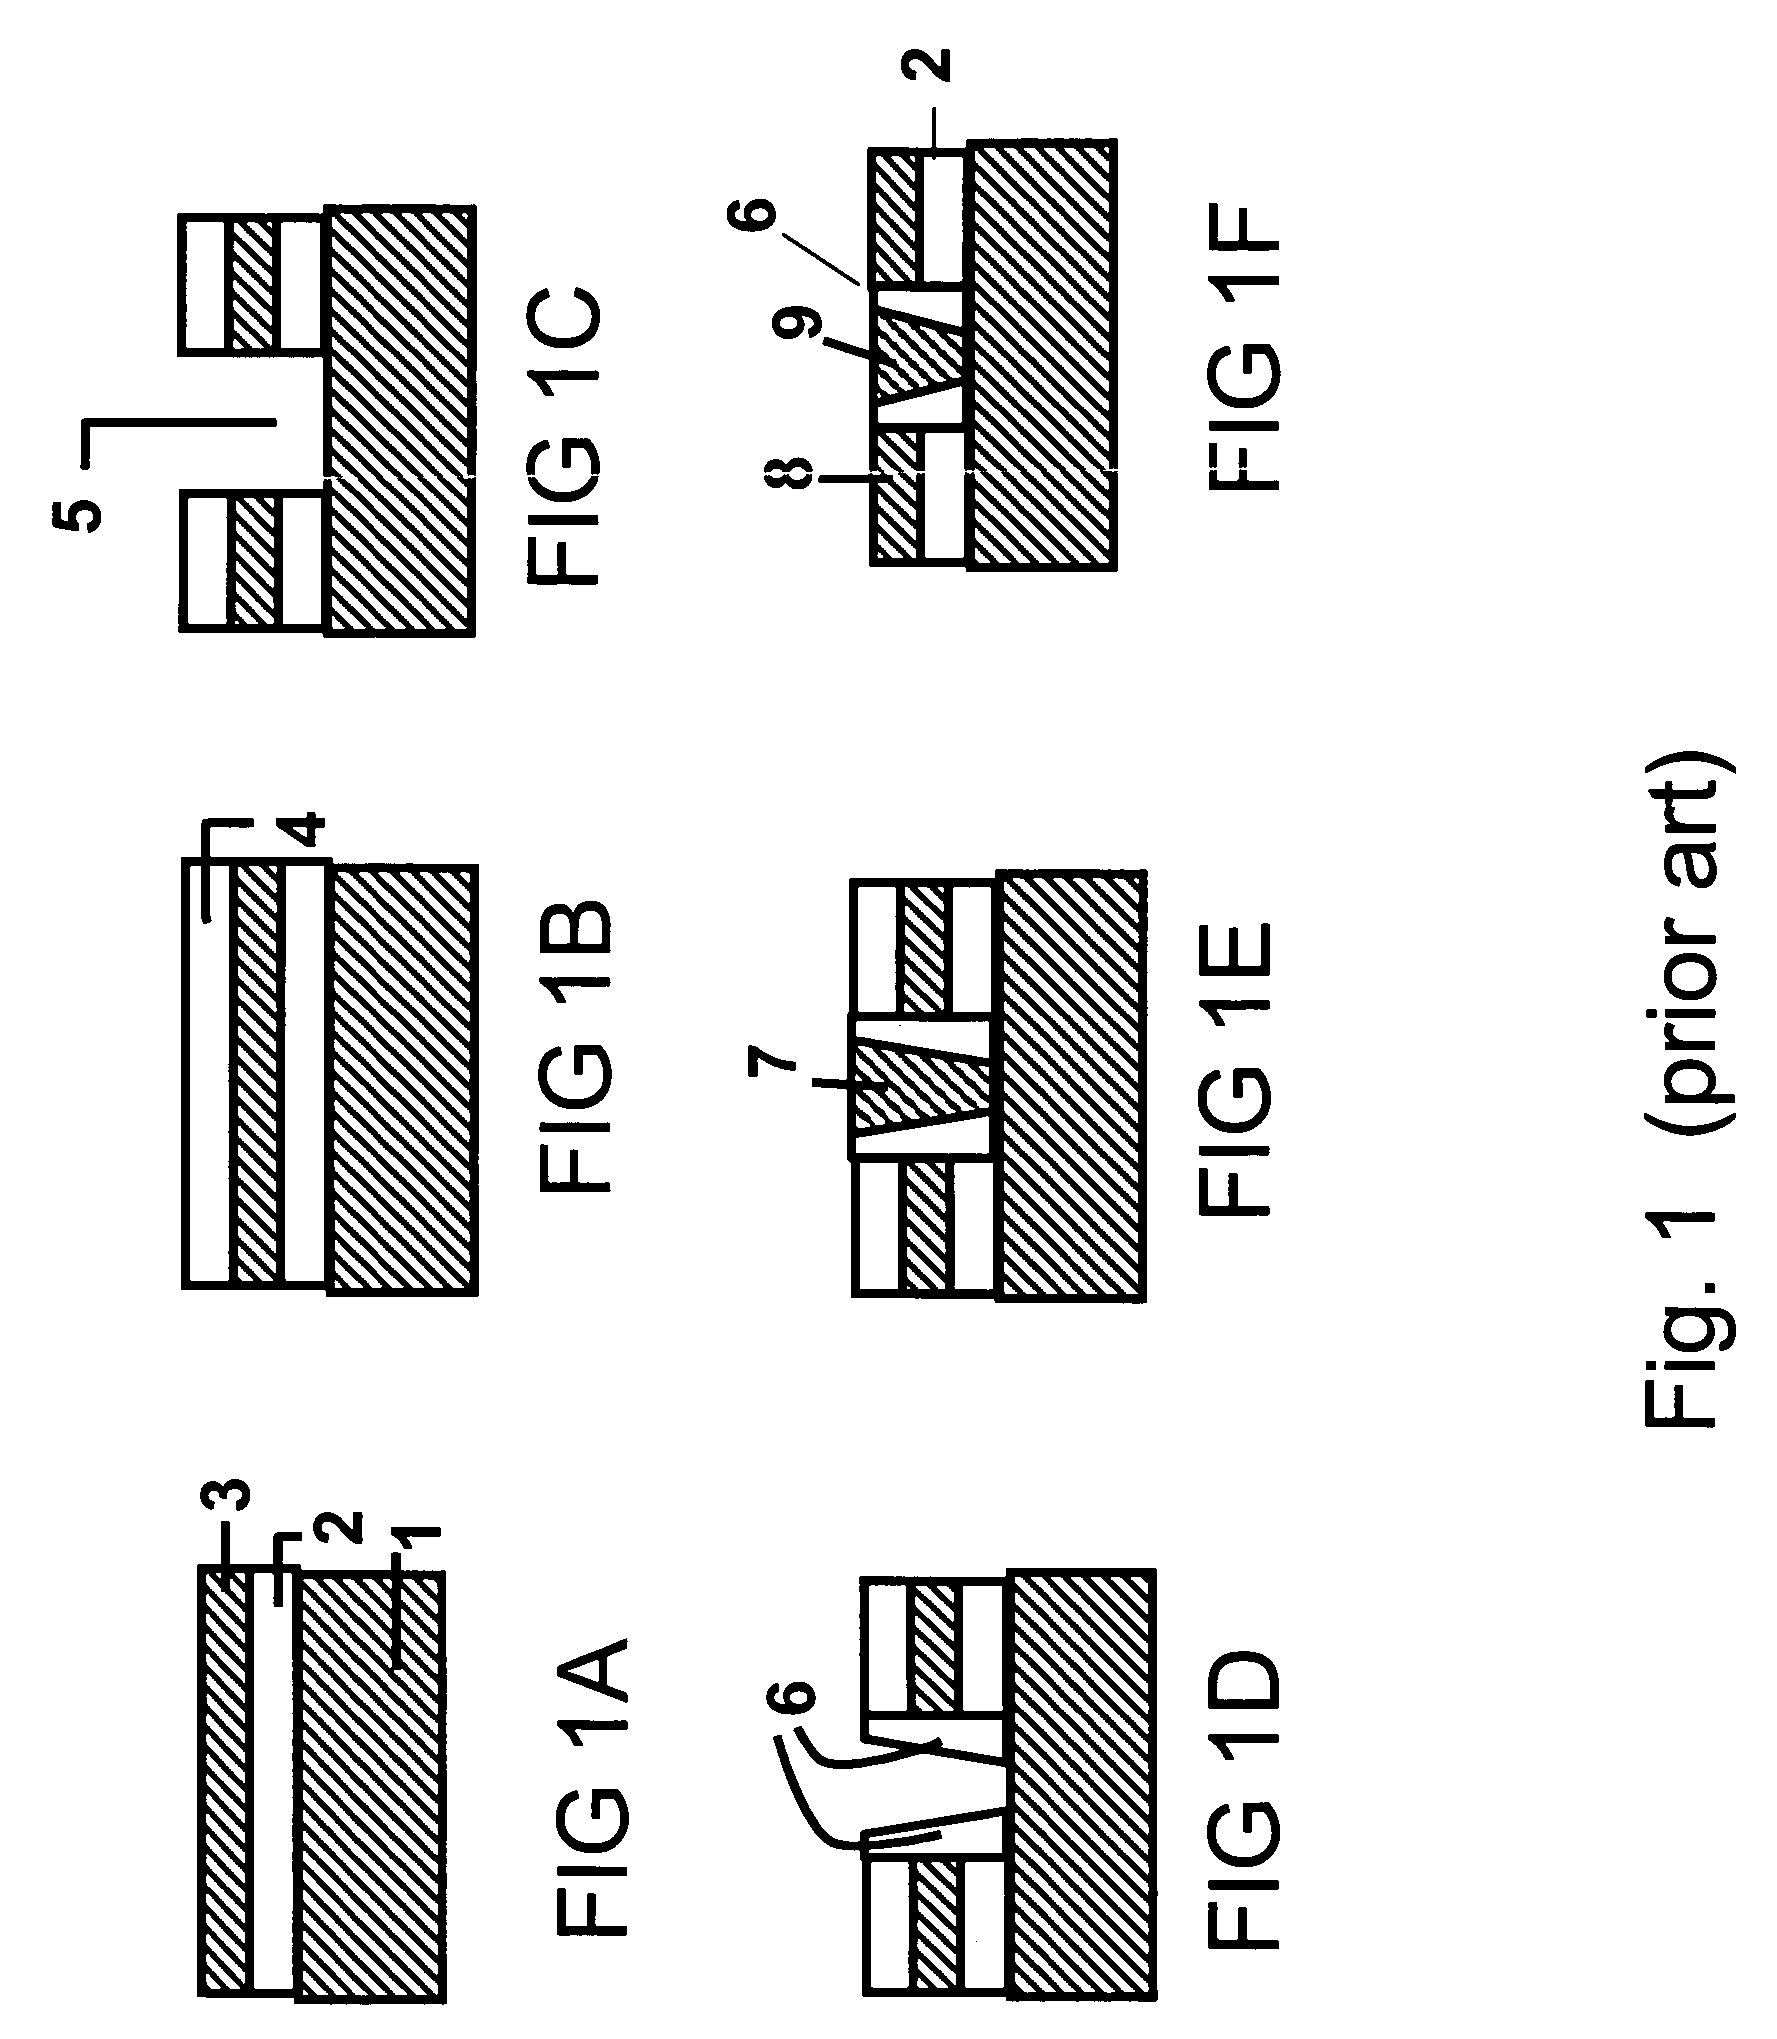 Mixed orientation and mixed material semiconductor-on-insulator wafer